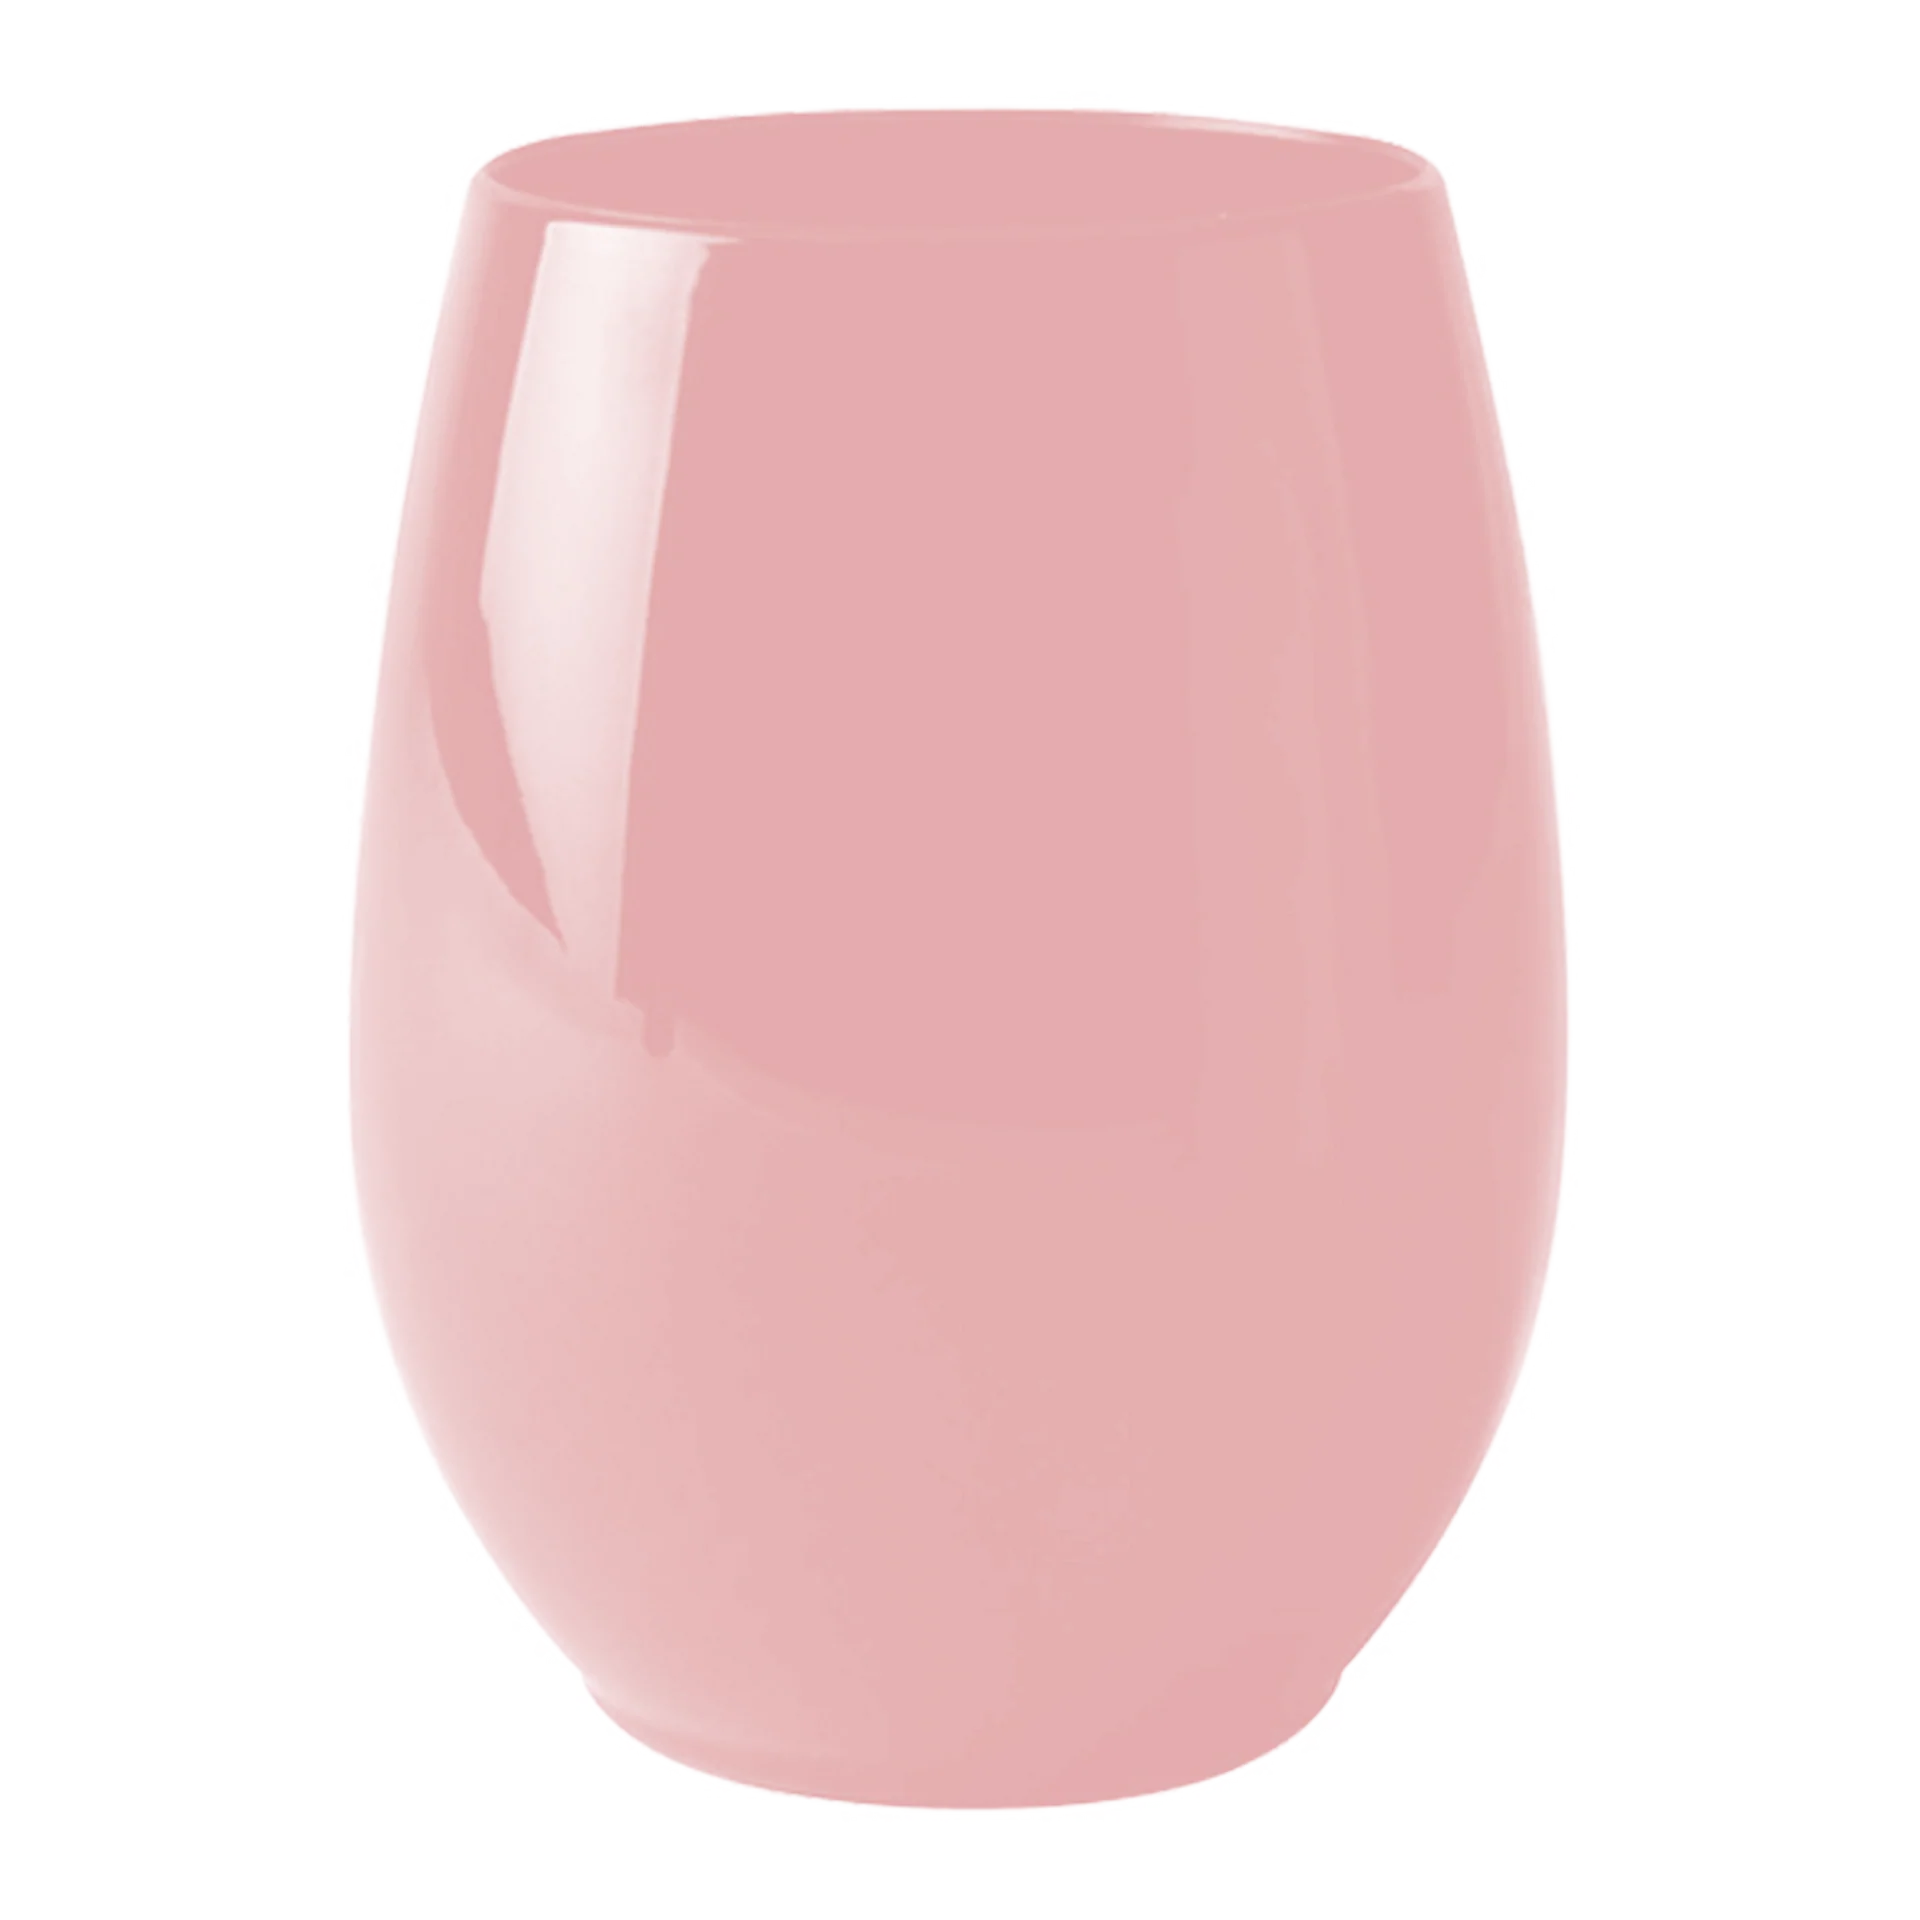 12 oz Stemless Wobble Rocker White, Pink or Red Wine Glasses